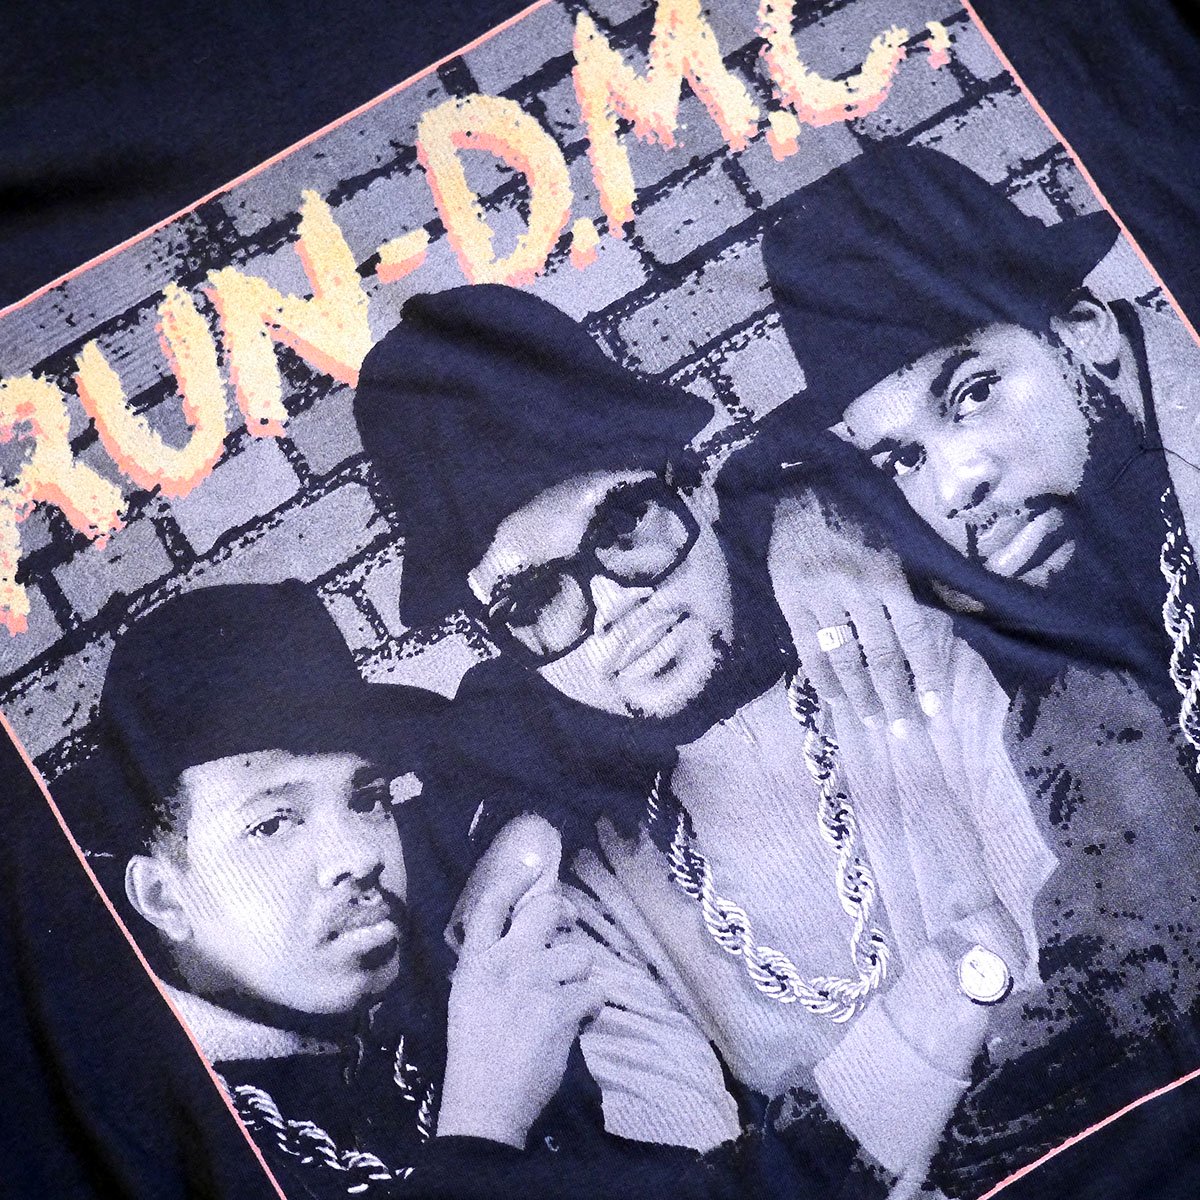 Fedup | HIPHOP WEAR | <img class='new_mark_img1' src='https://img.shop-pro.jp/img/new/icons30.gif' style='border:none;display:inline;margin:0px;padding:0px;width:auto;' />Run DMC 